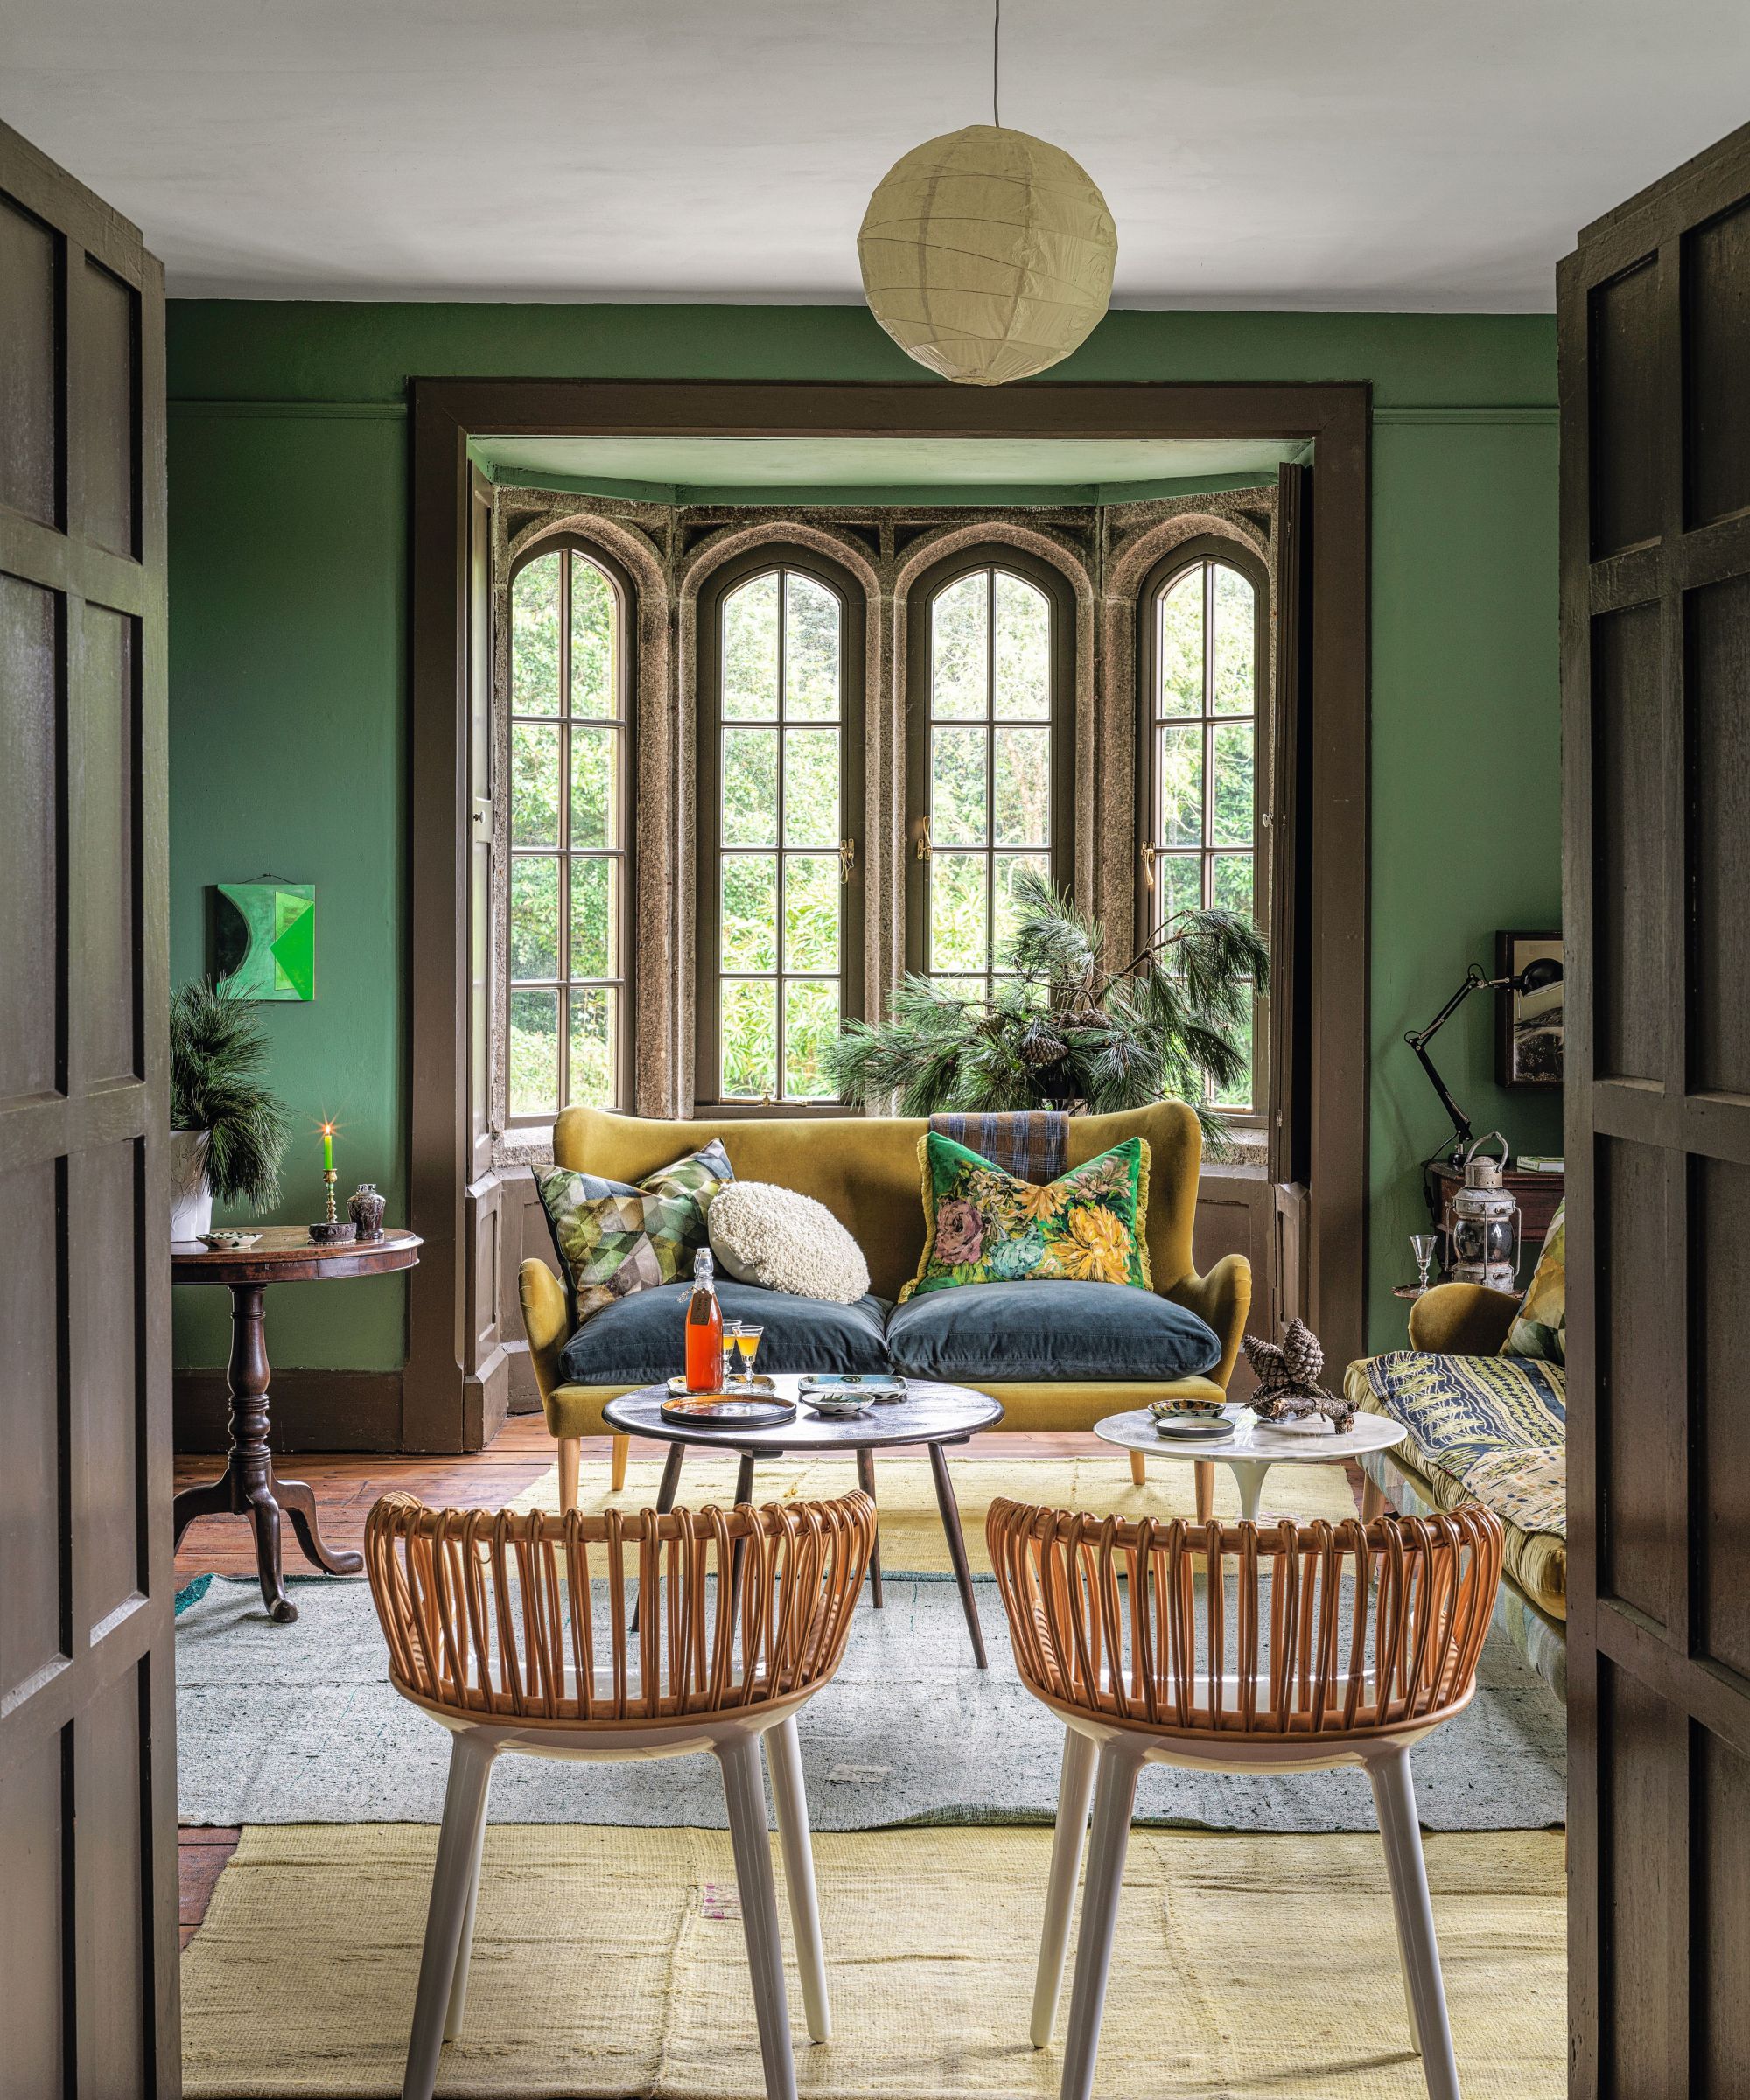 A green living room with large picture windows and eclectic furniture